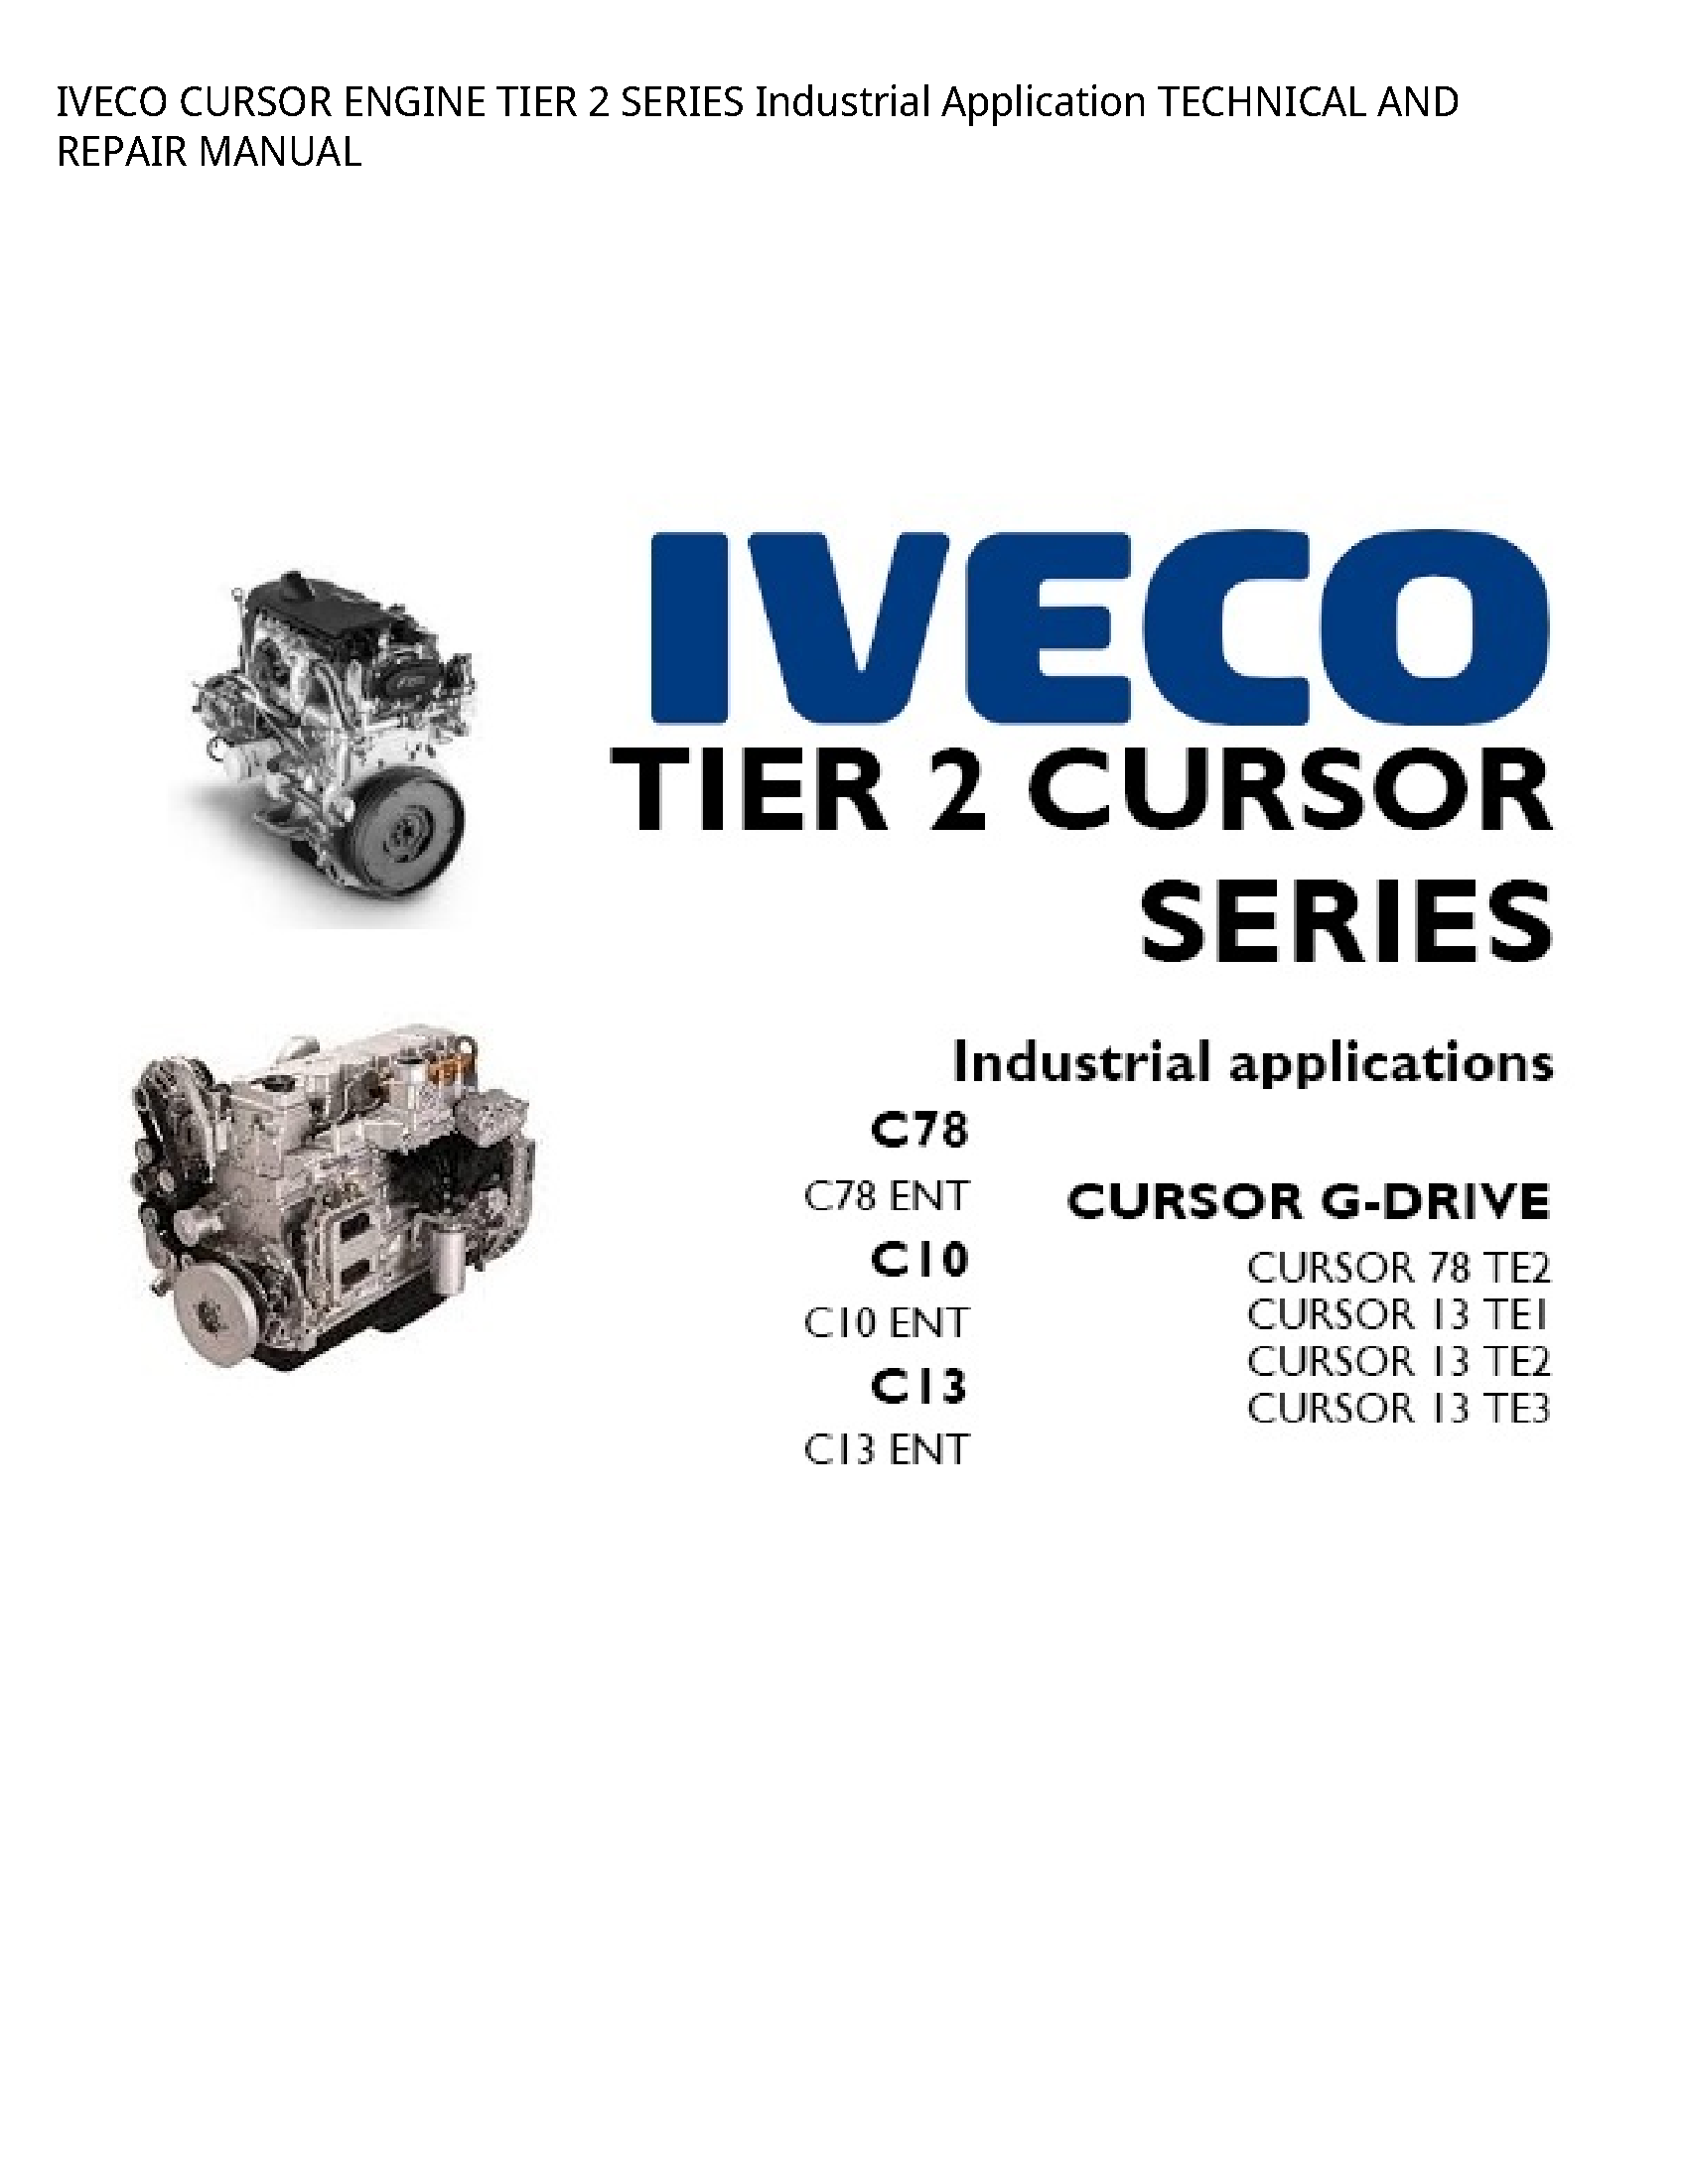 Iveco 2 CURSOR ENGINE TIER SERIES Industrial Application TECHNICAL AND REPAIR manual